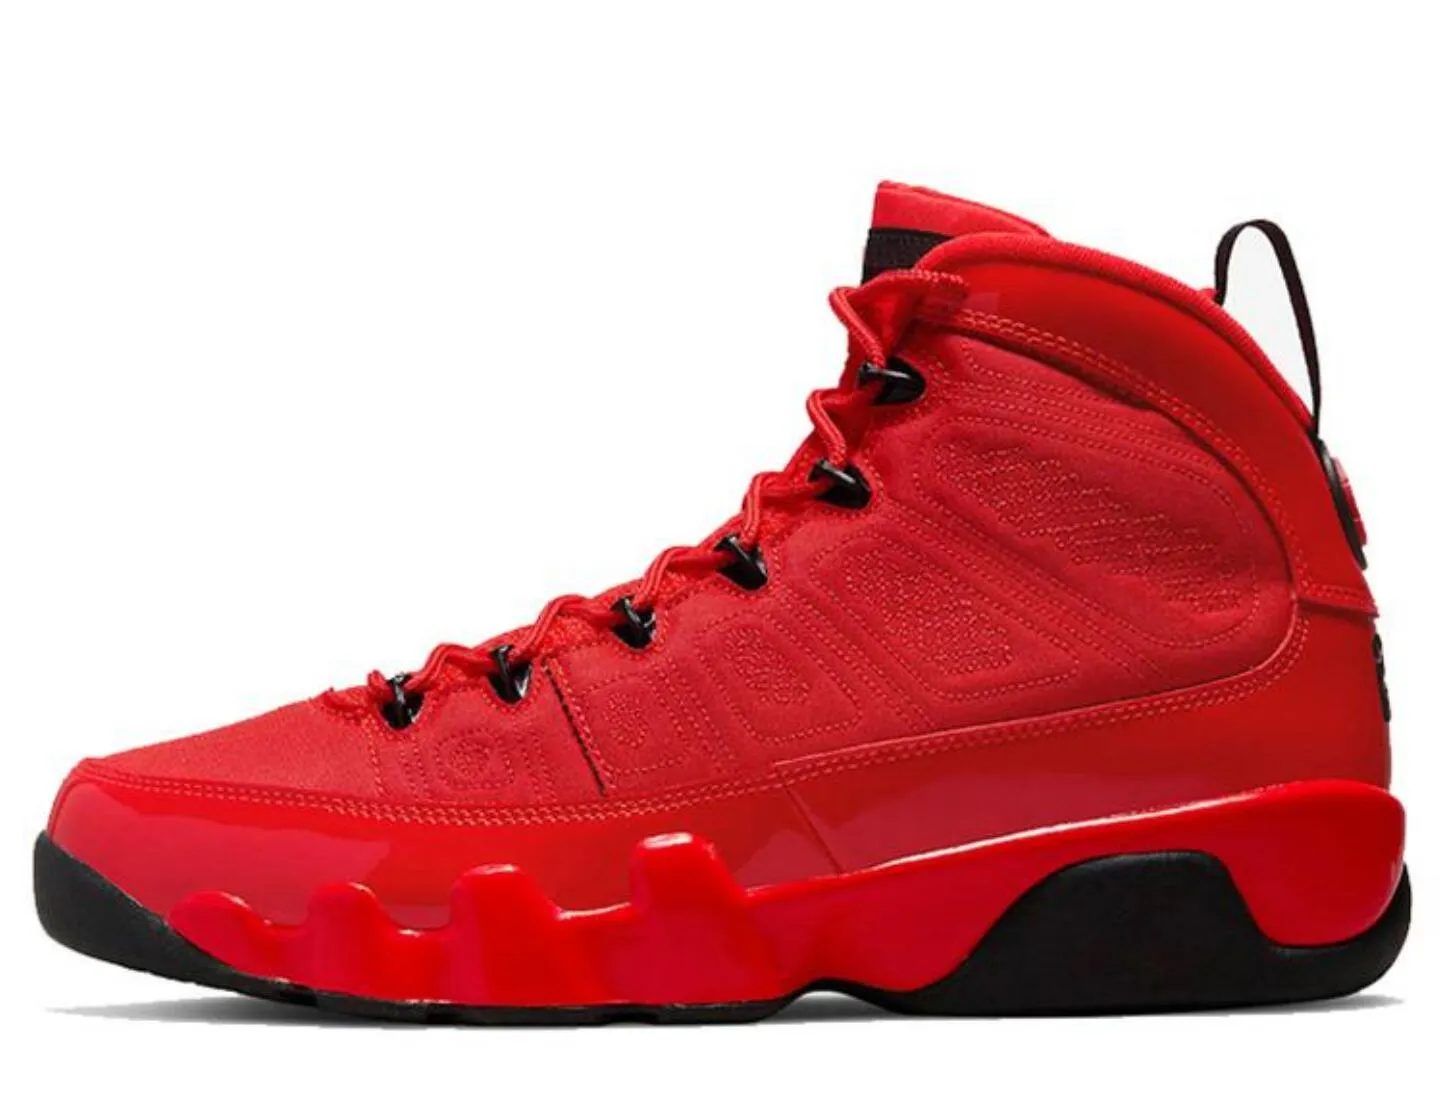 Jumpman 9 Men Basketball Shoes 9s Cile rosso Mens Trainers Outdoor Sneakers Taglia 6 6.5 7 7.5 8 8.5 9 9.5 10 10.5 11 11.5 12 12.5 13 13.5